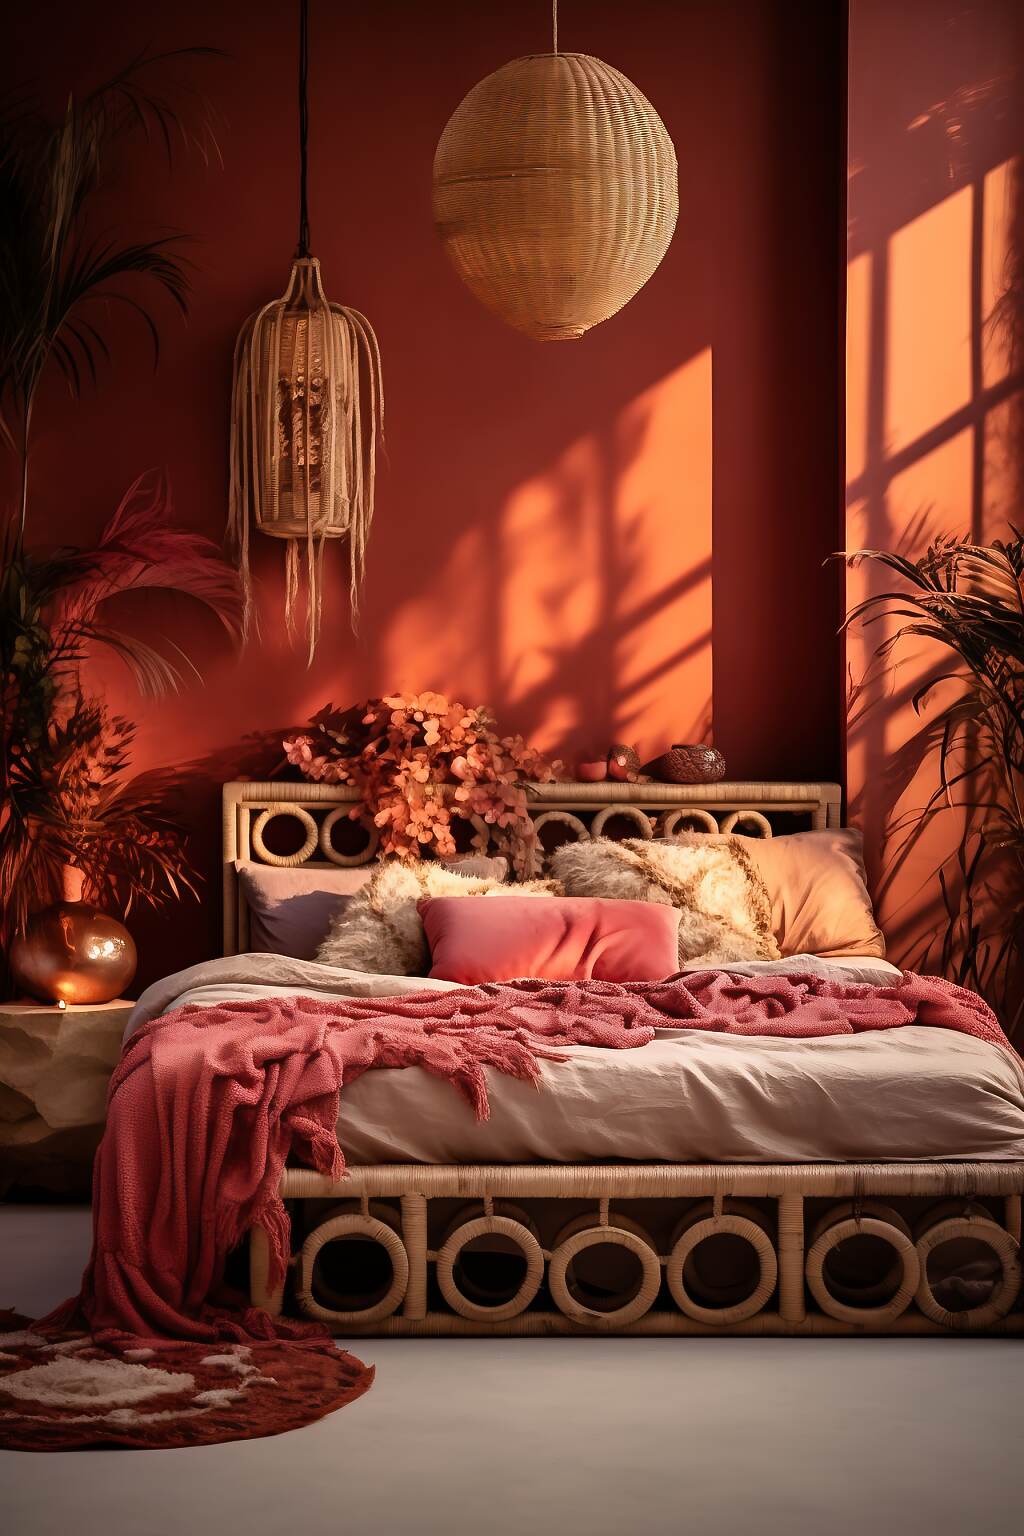 Large Dark Boho Bedroom With An Orange &Amp; Beige Color Scheme, Featuring Sun Art, Rattan Furniture, And Desert Paintings, Creating A Calm And Relaxing Atmosphere.